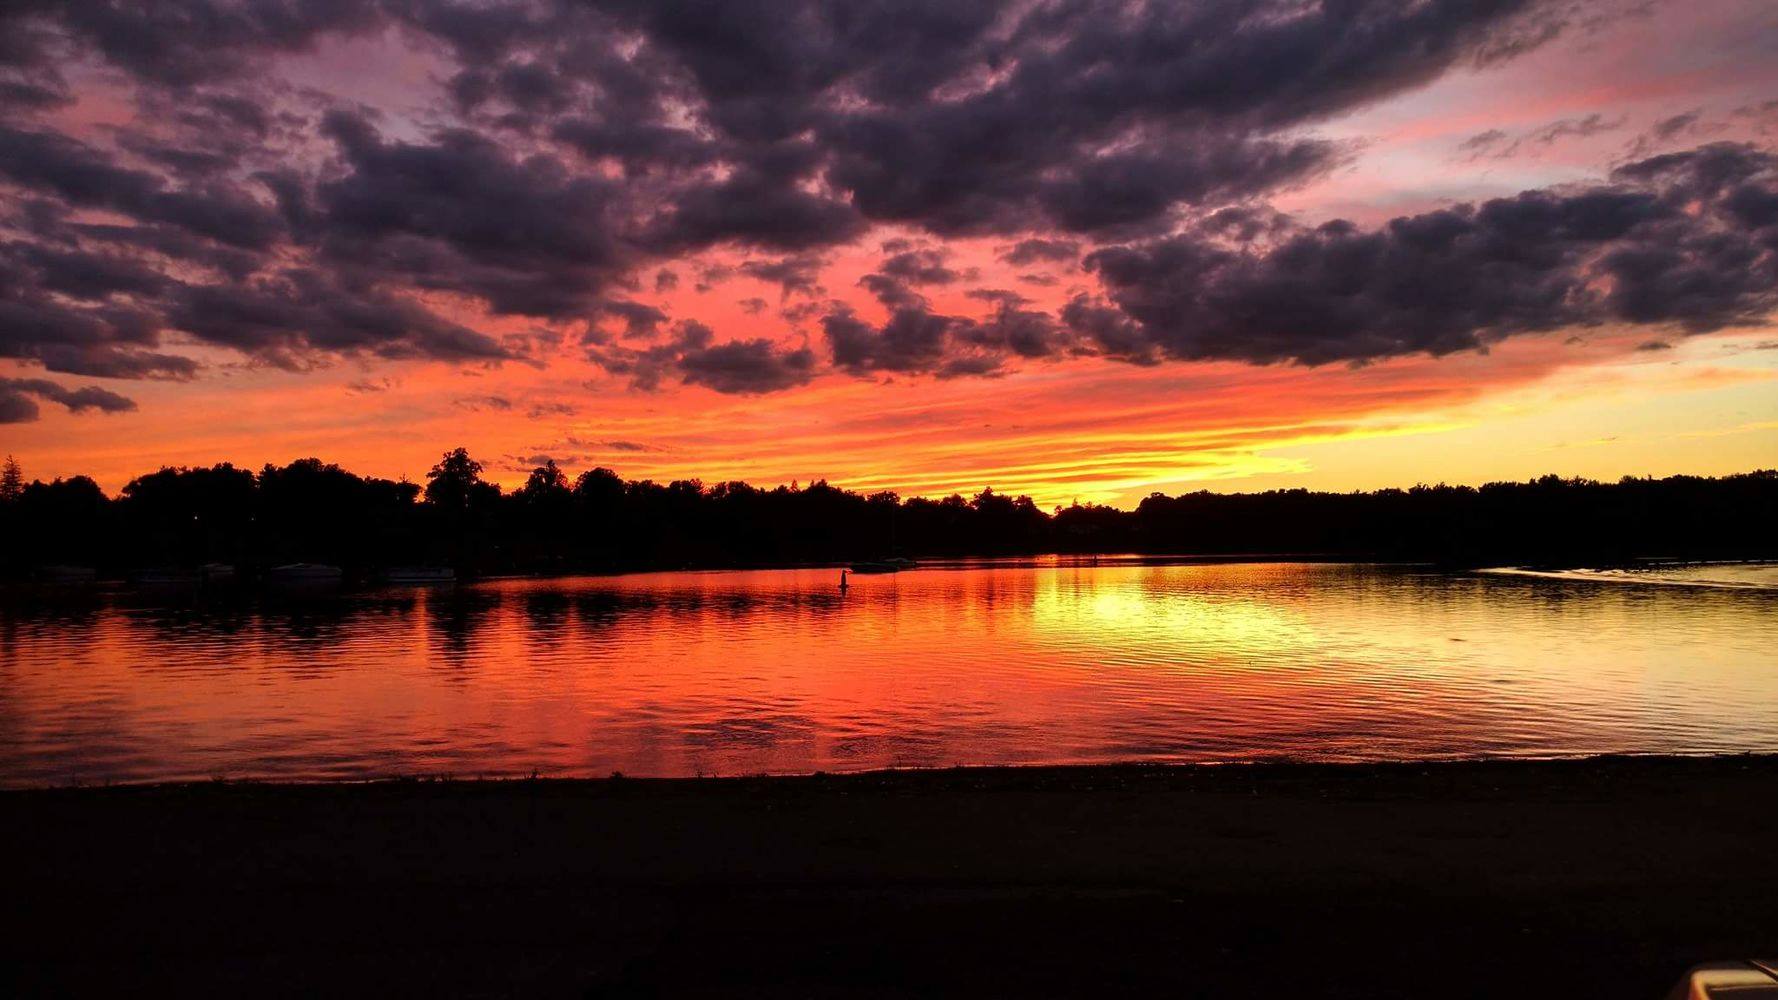 Sunset @Wethersfield Cove 